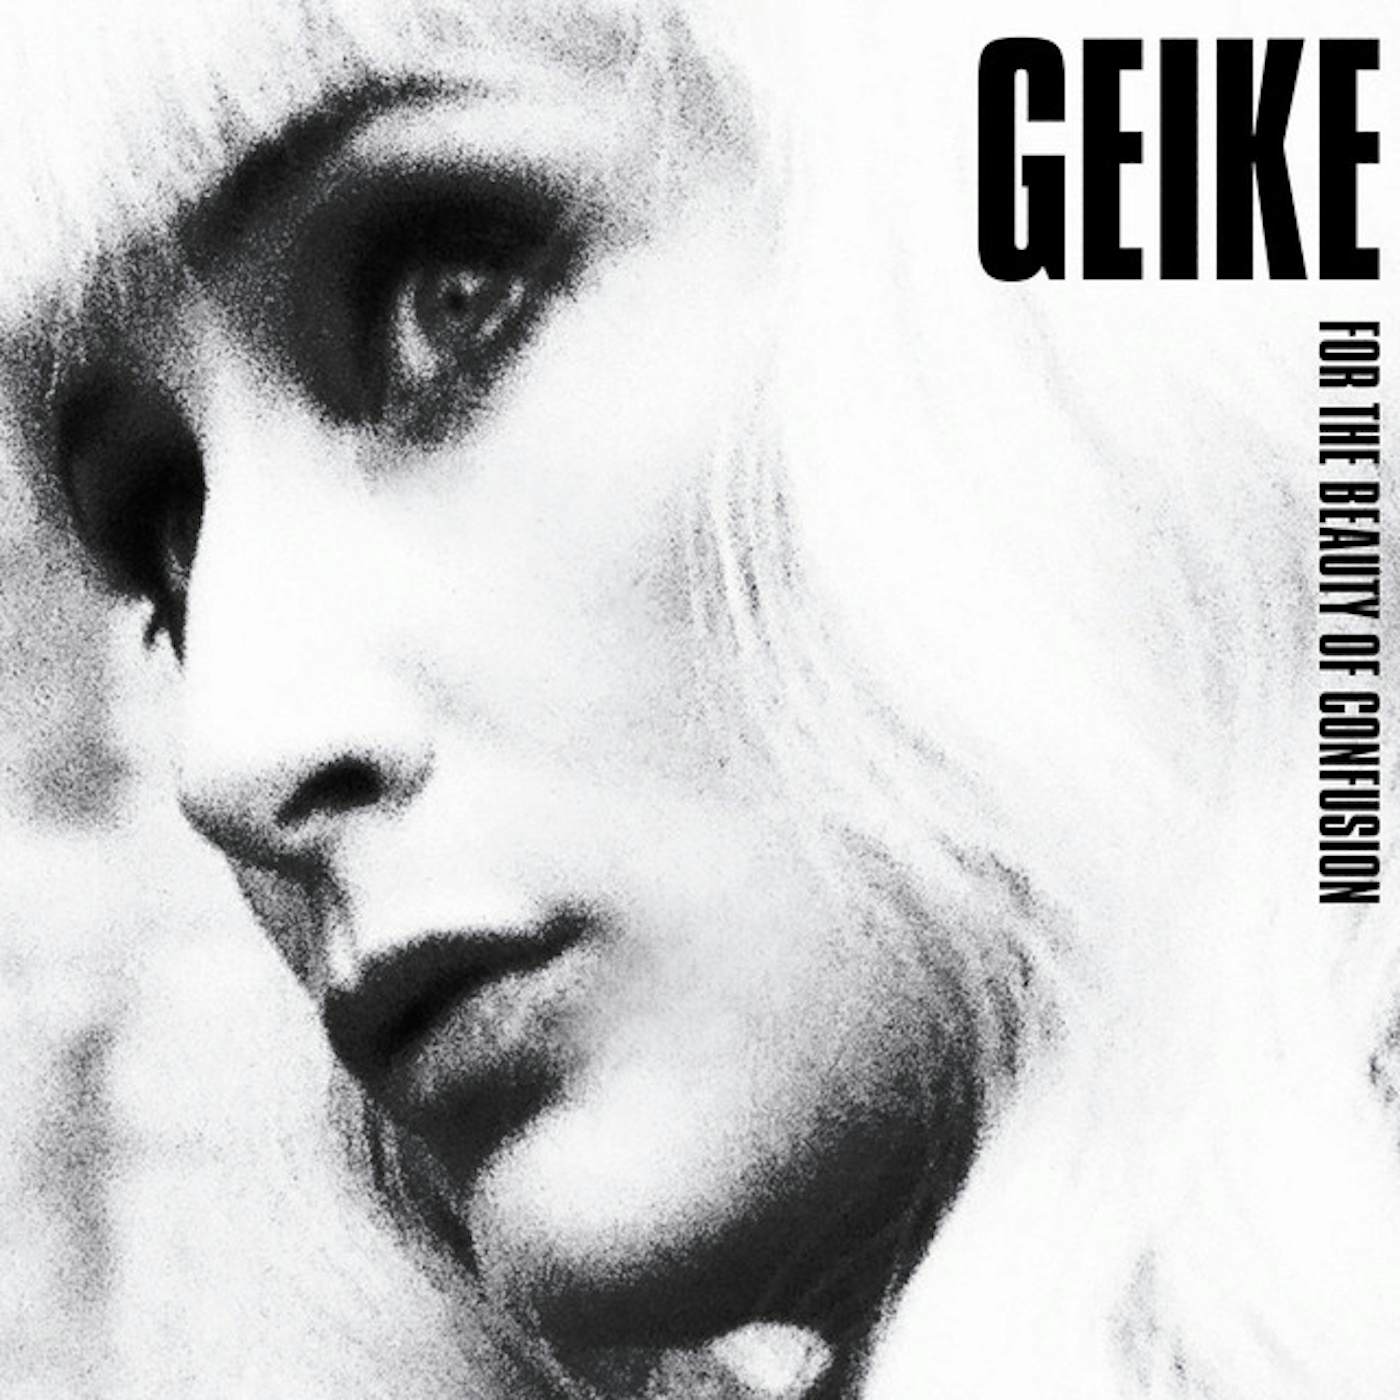 Geike For The Beauty Of Confusion Vinyl Record